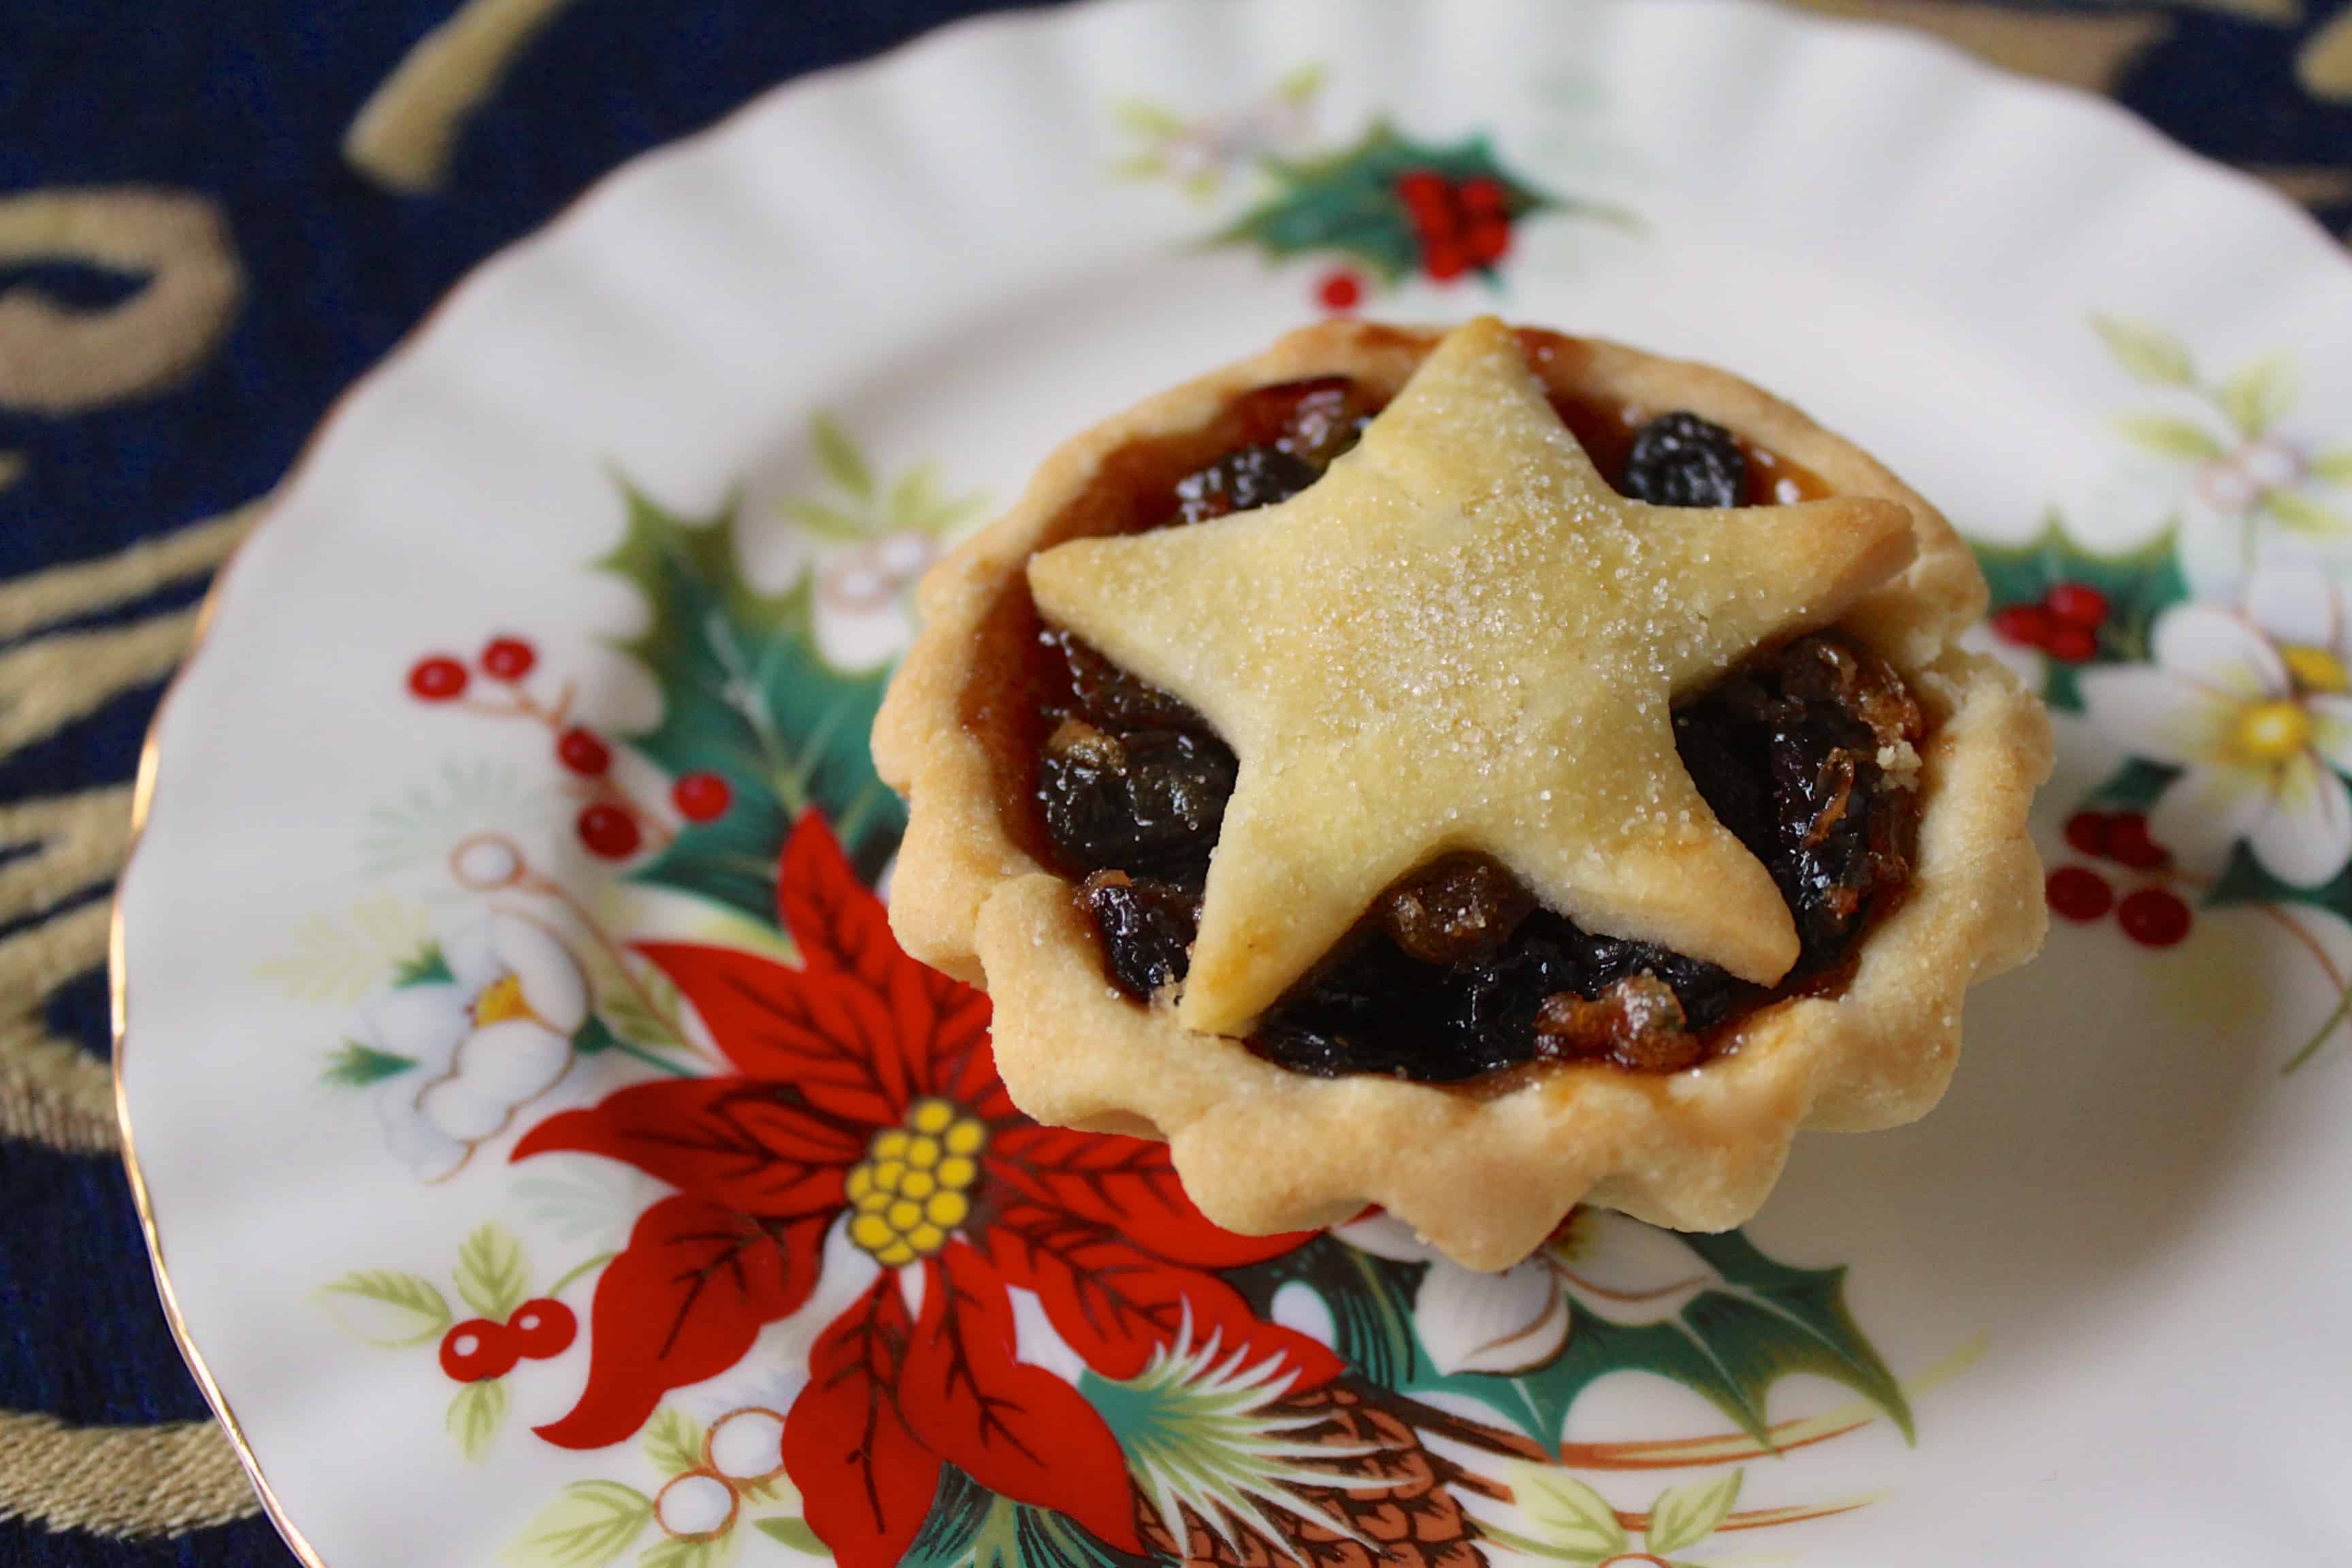 Mince Pies (Mincemeat) Pies for a Traditional British Christmas Treat - Christina's Cucina